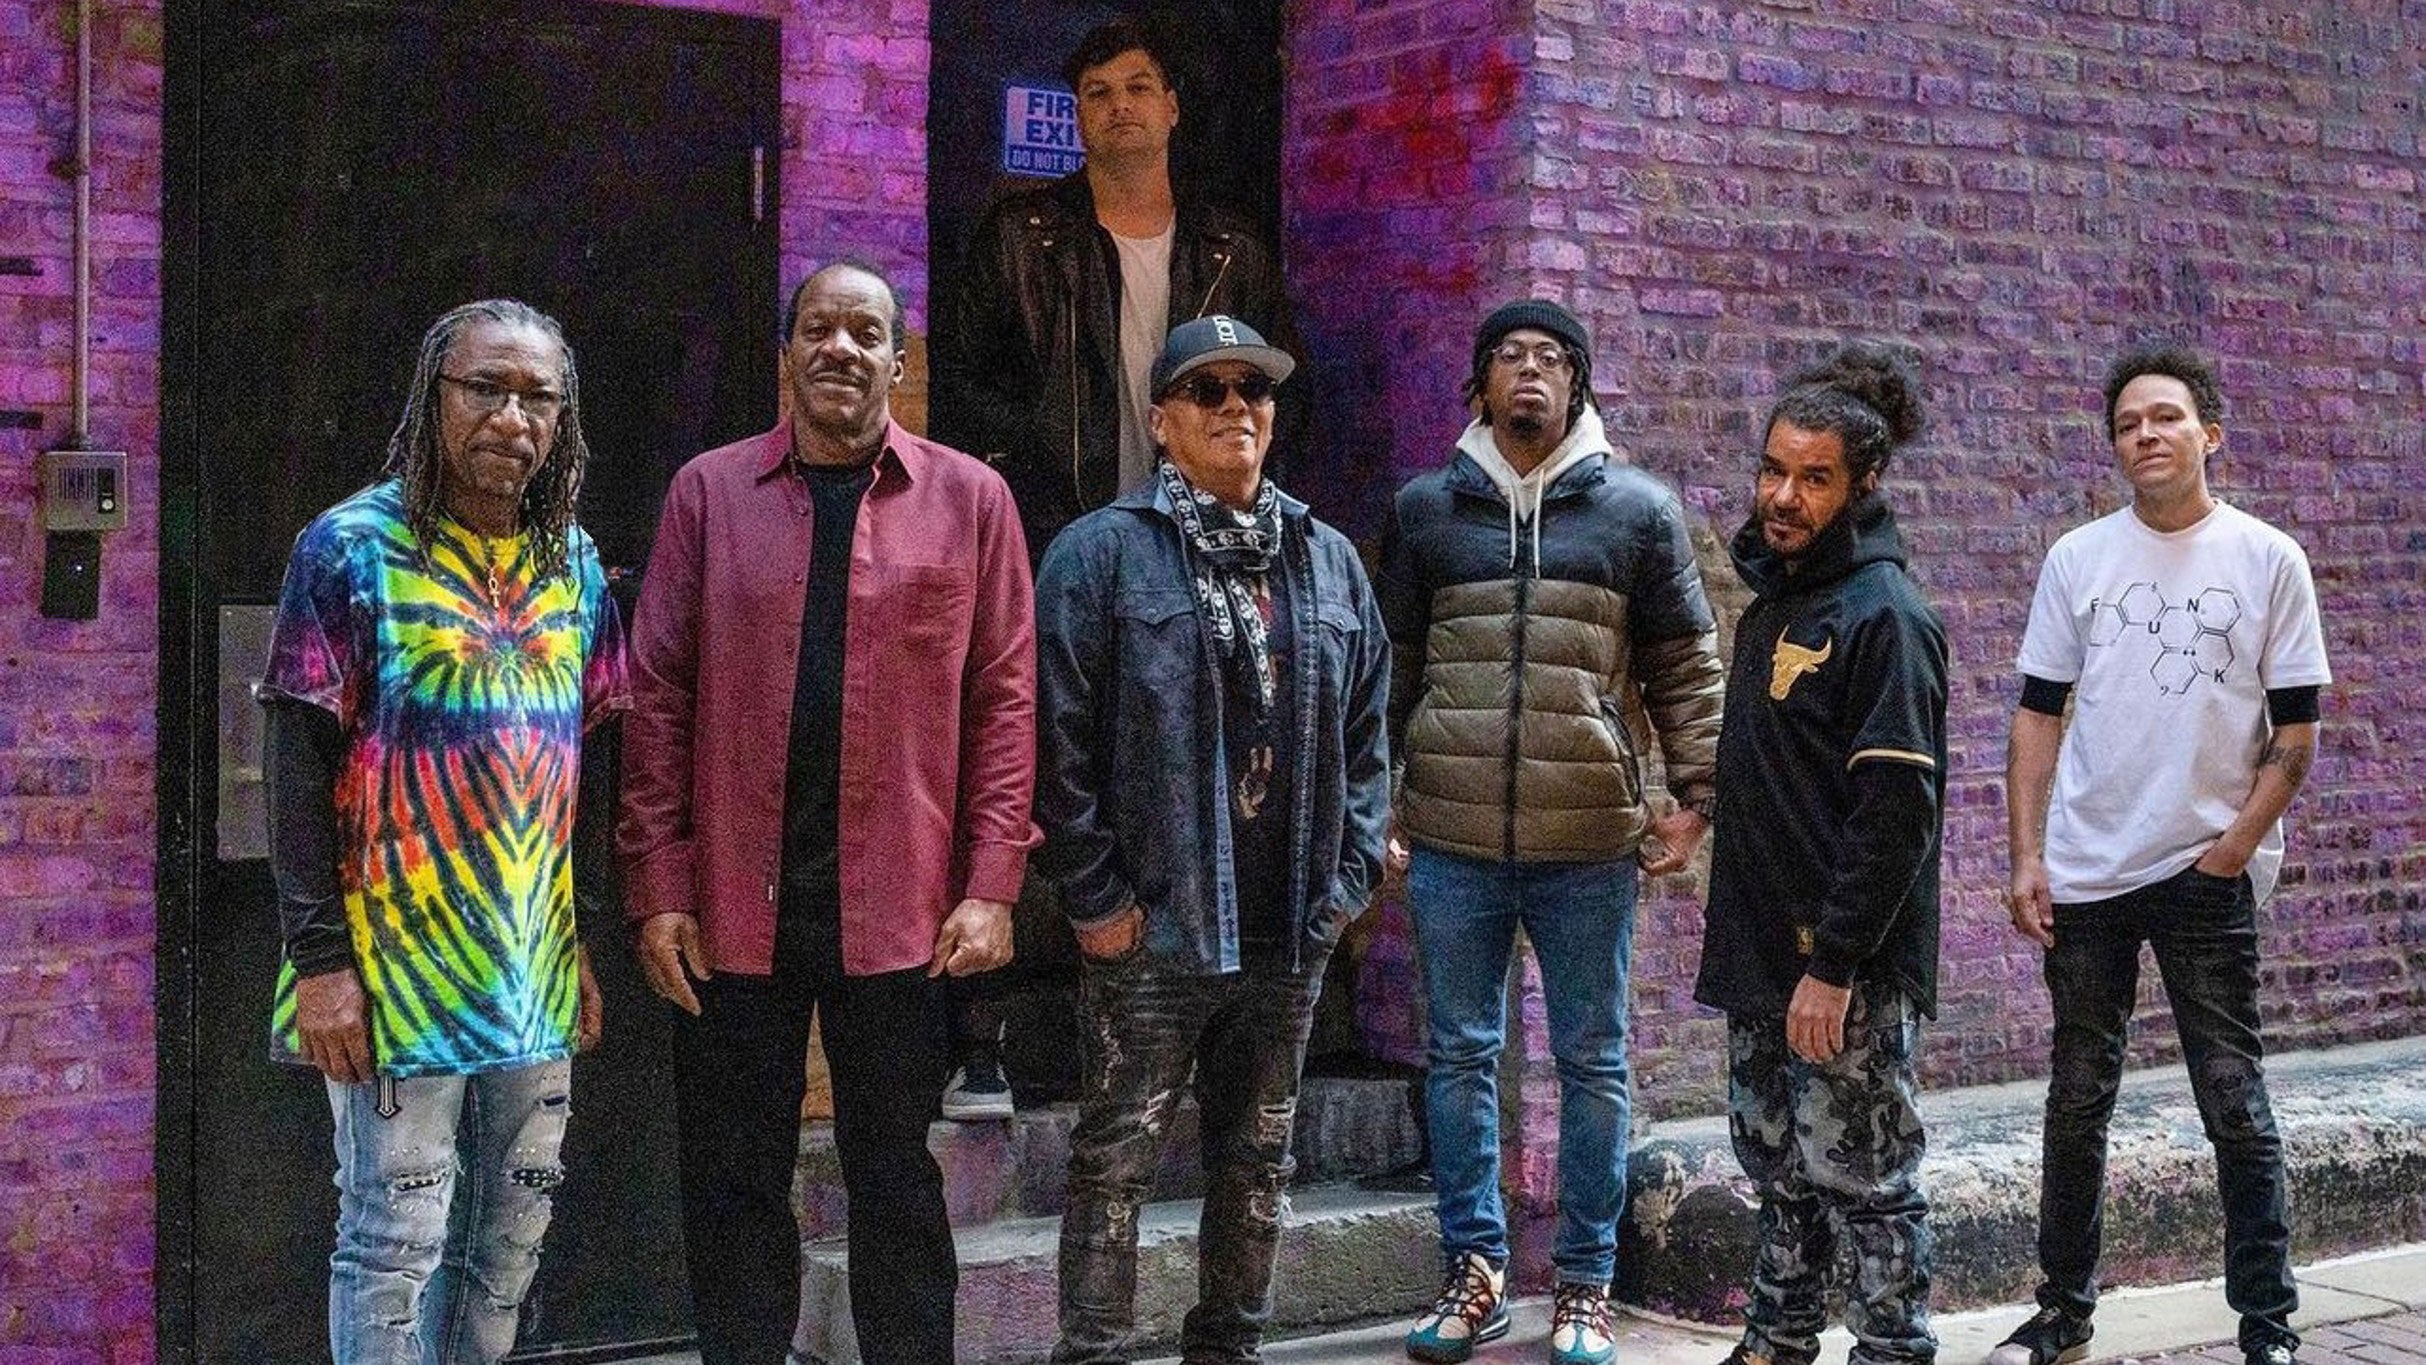 Official Tedeschi Trucks Band After Party featuring Dumpstaphunk in Atlantic City promo photo for Ticketmaster presale offer code